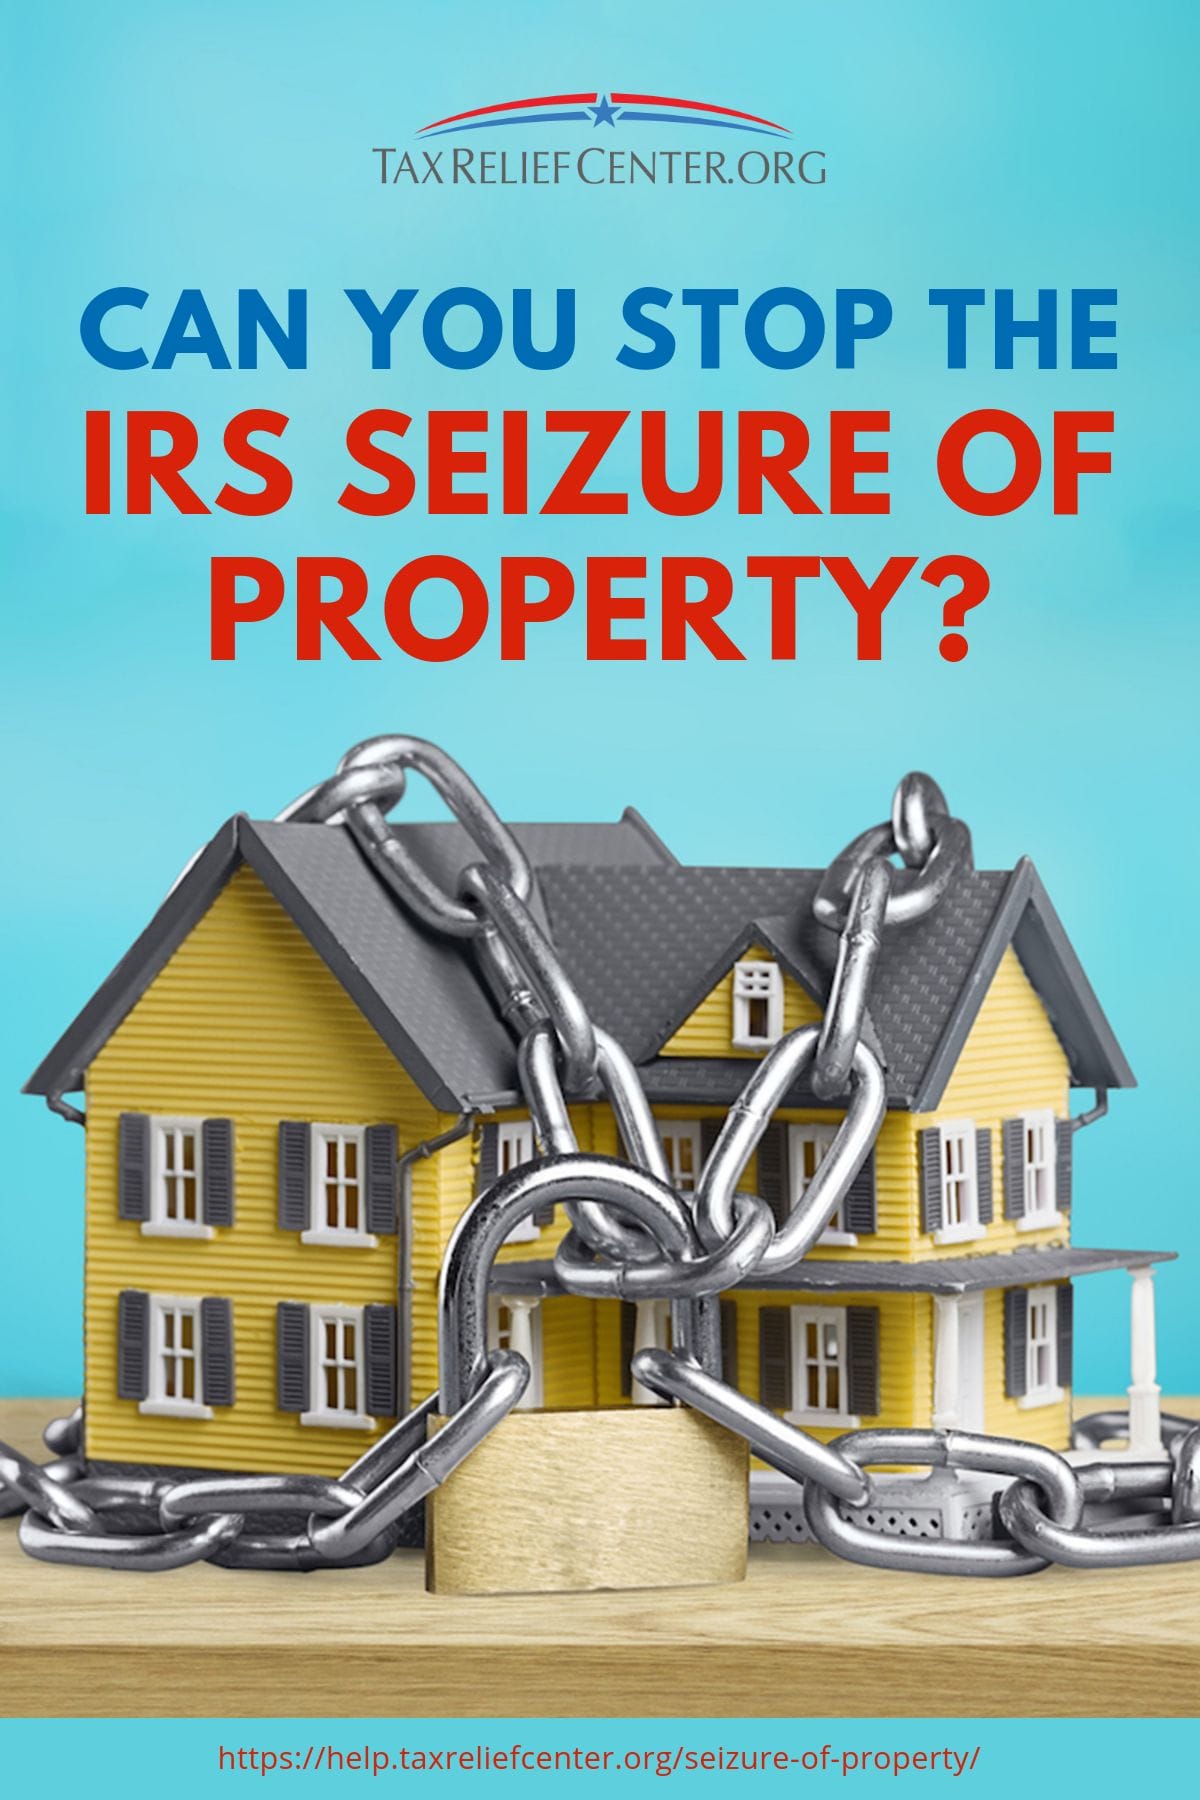 Can You Stop The IRS Seizure Of Property? https://help.taxreliefcenter.org/seizure-of-property/